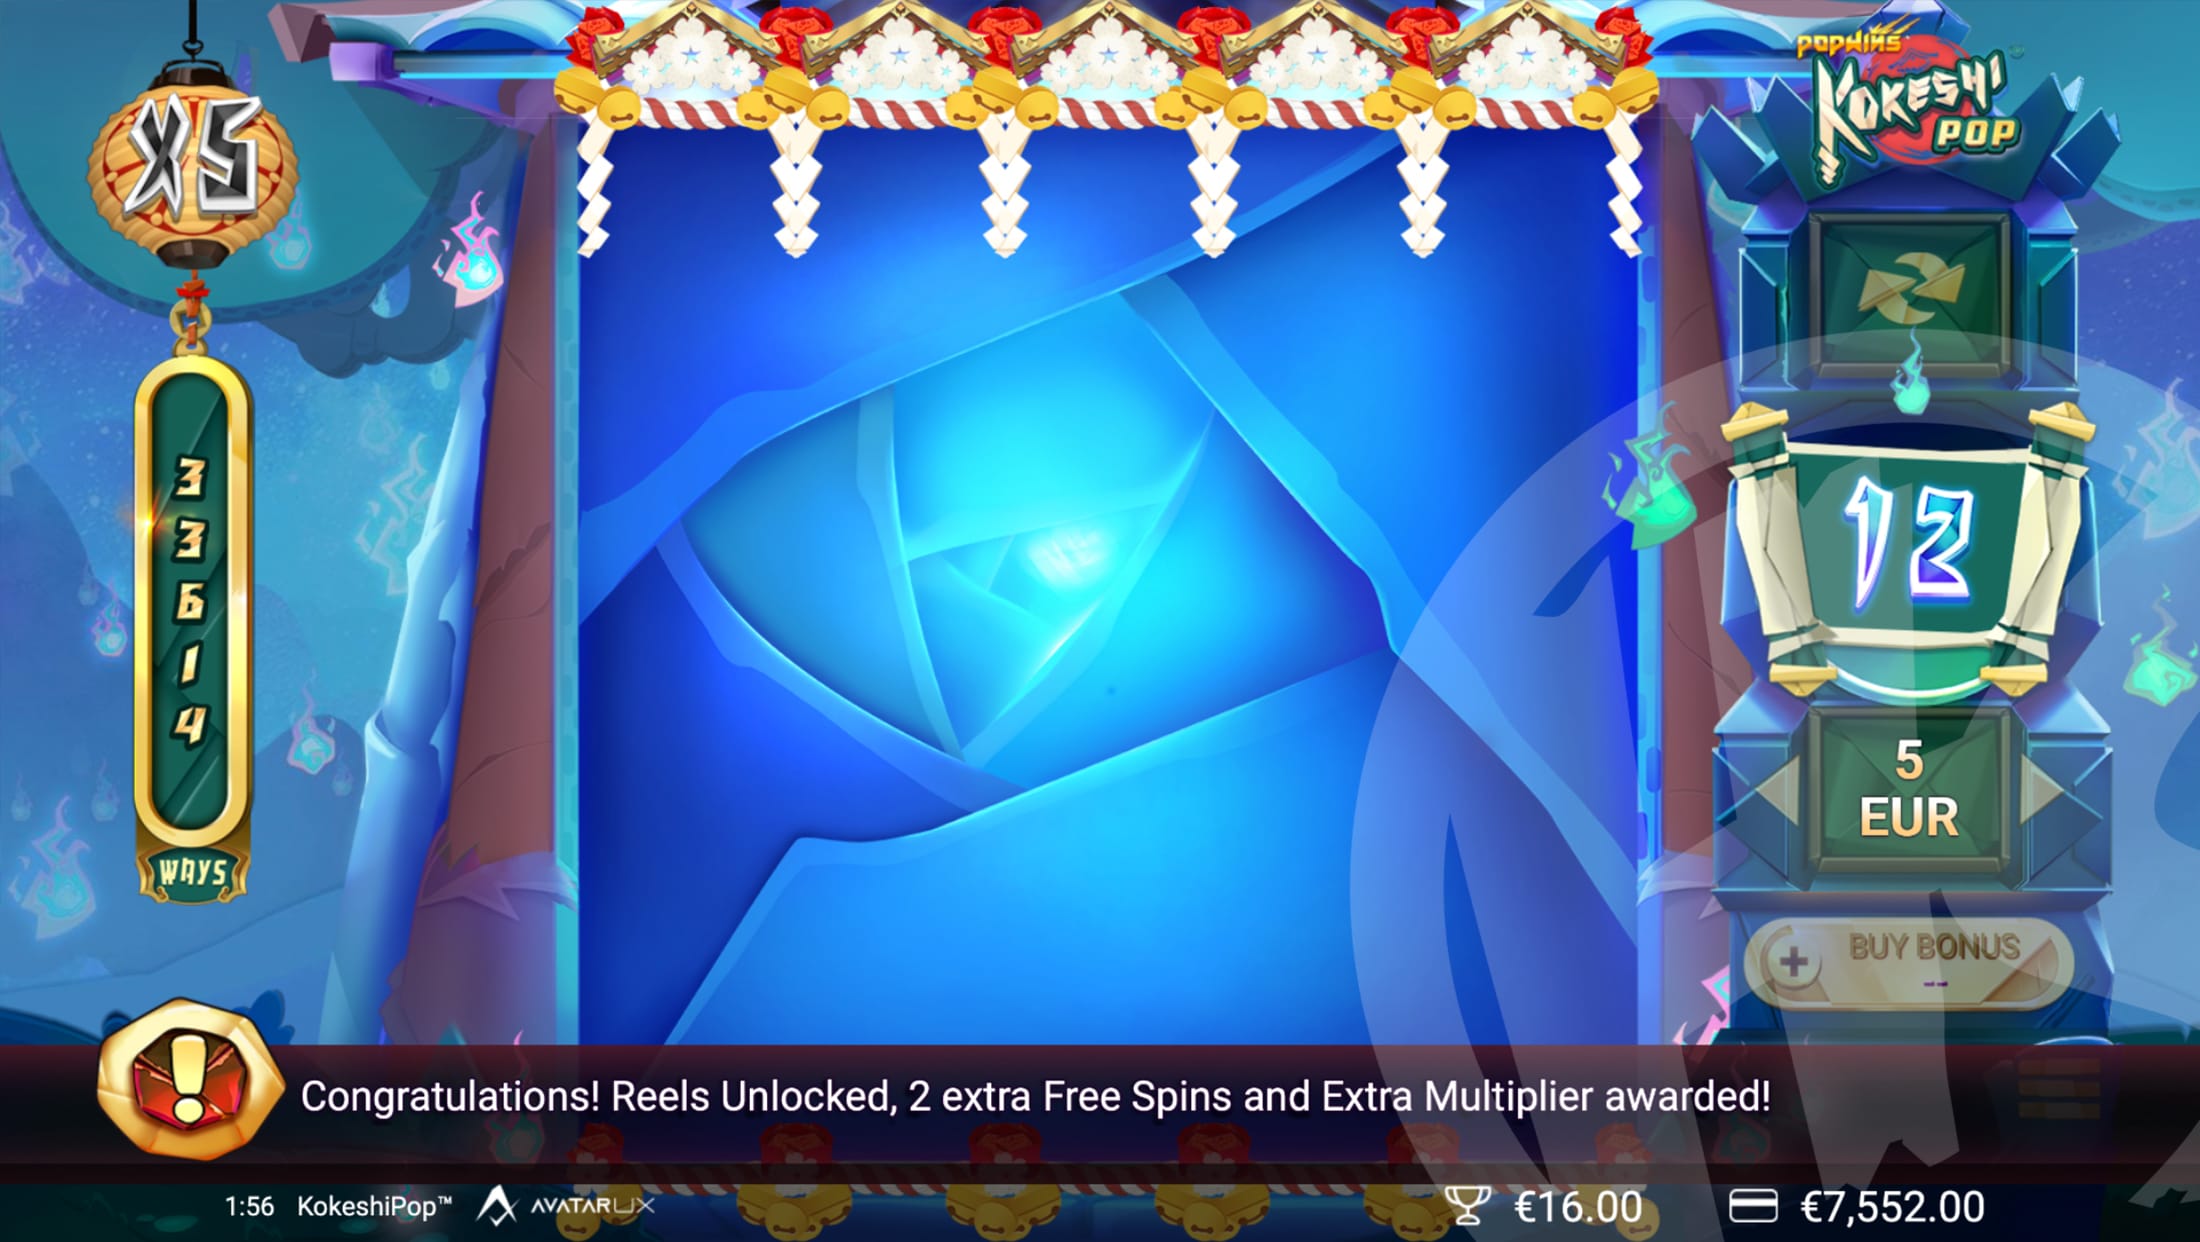 Unlocking all Reels in Free Spins Multiplies the Existing Multiplier by x5, x10, or x20, and Replaces All Symbols